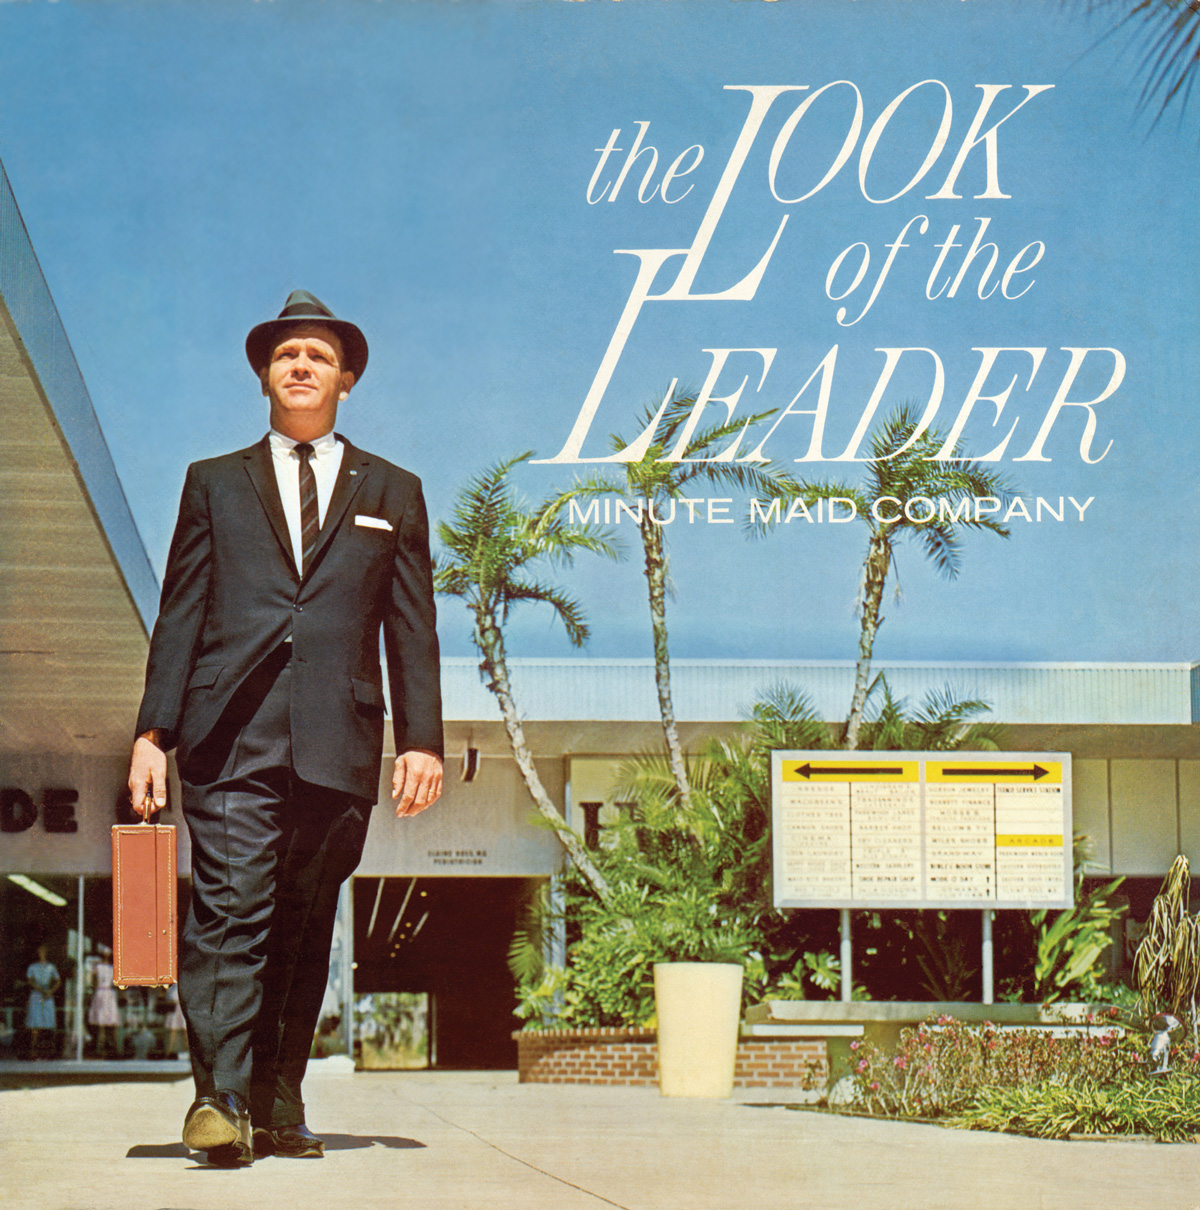 An album cover from 1963 for a Minute Maid industrial musical titled “The Look of the Leader.”